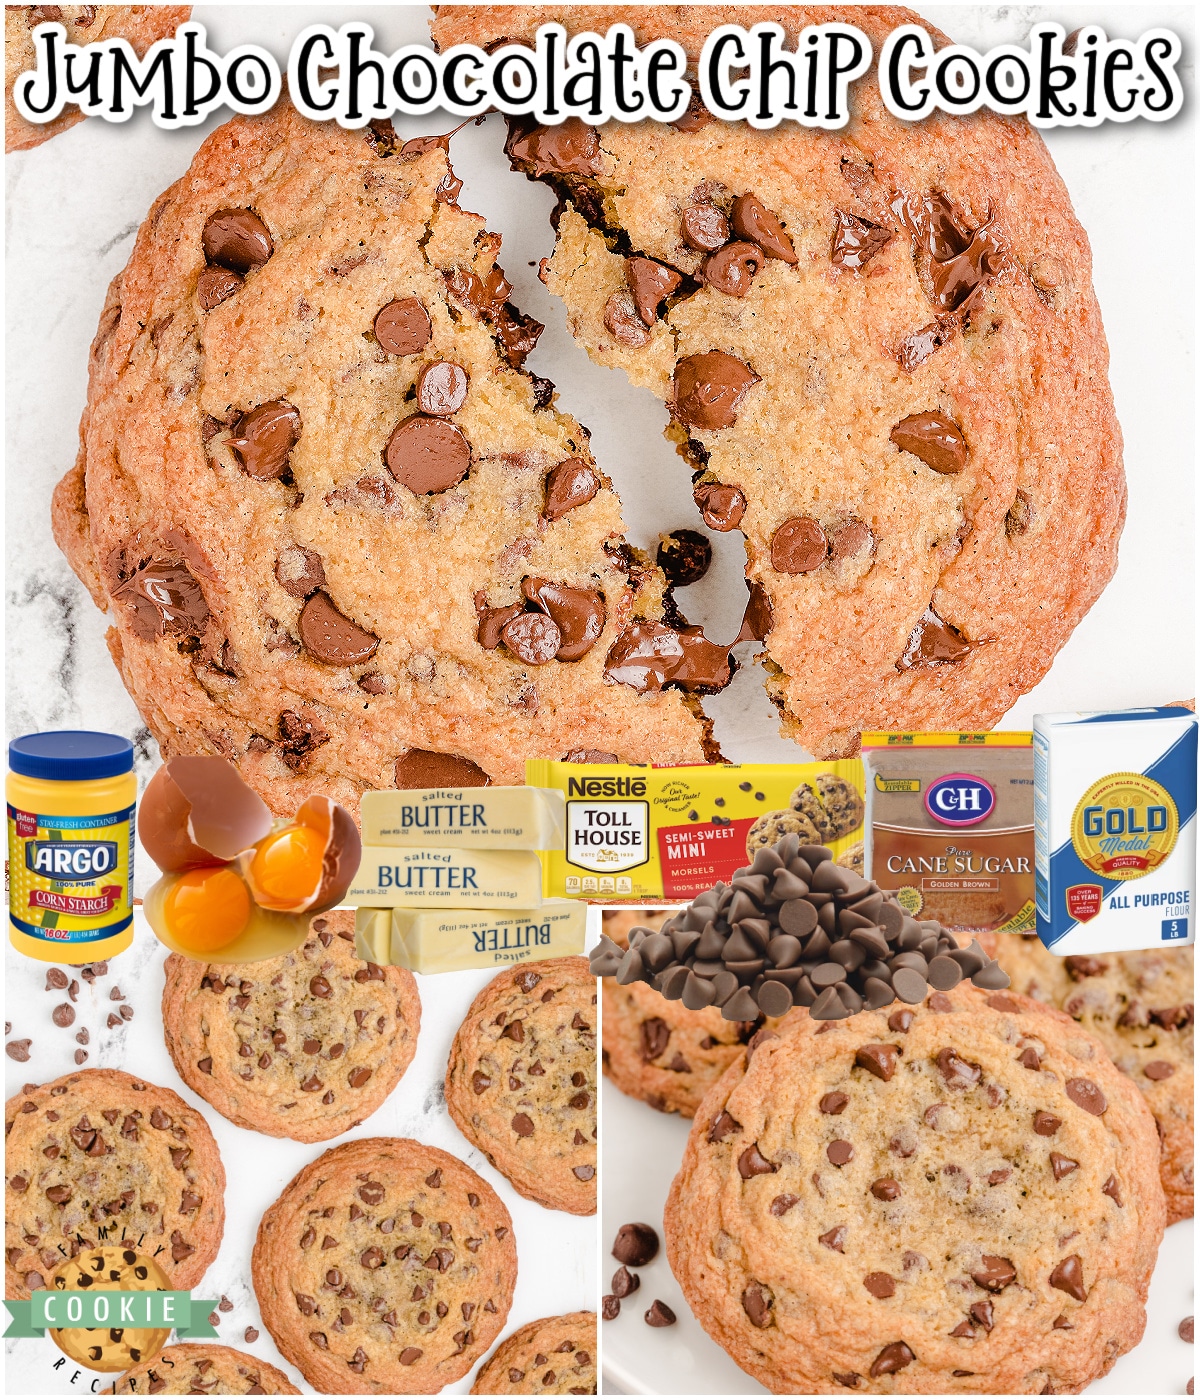 Jumbo Chocolate Chip Cookies made with classic ingredients & twice the size of traditional cookies! Soft, chewy & thick chocolate chip recipe perfect for cookie lovers!